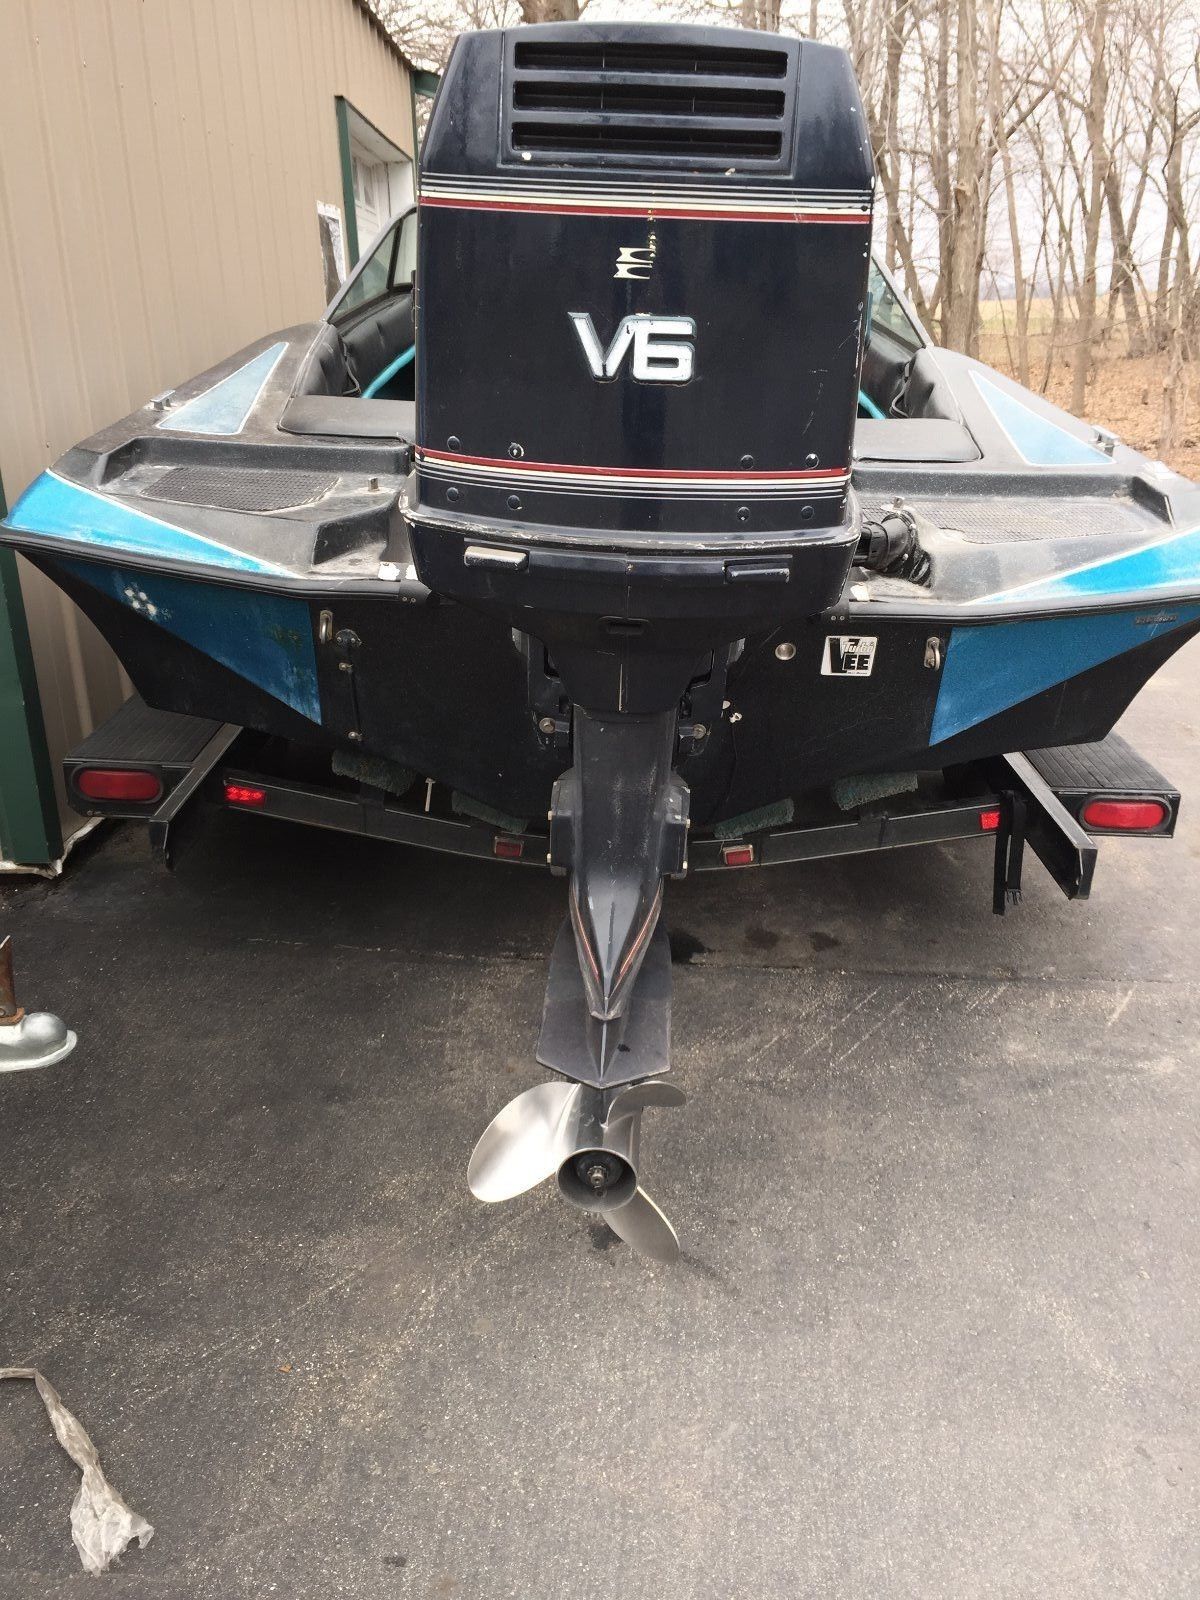 stratos 201 ski 1993 for sale for - boats-from-usa.com